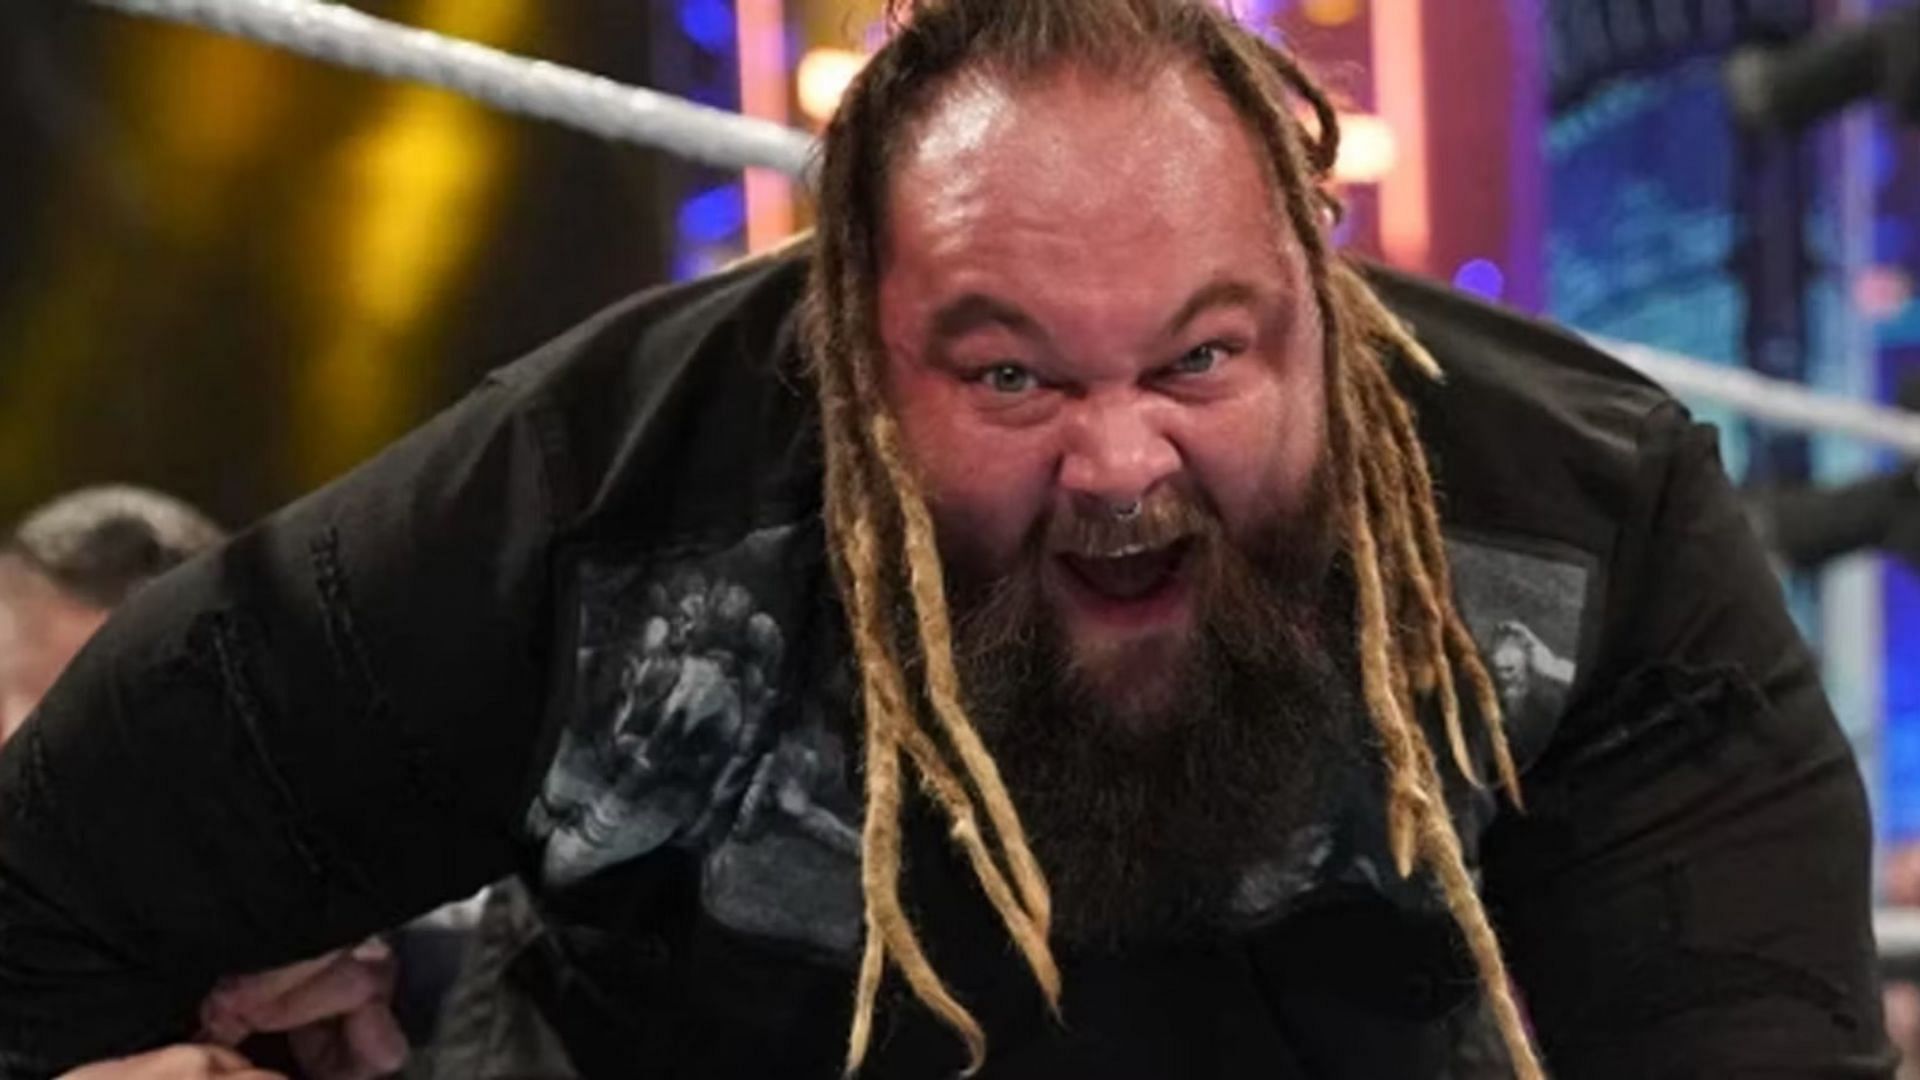 Bray Wyatt is currently on the WWE SmackDown roster